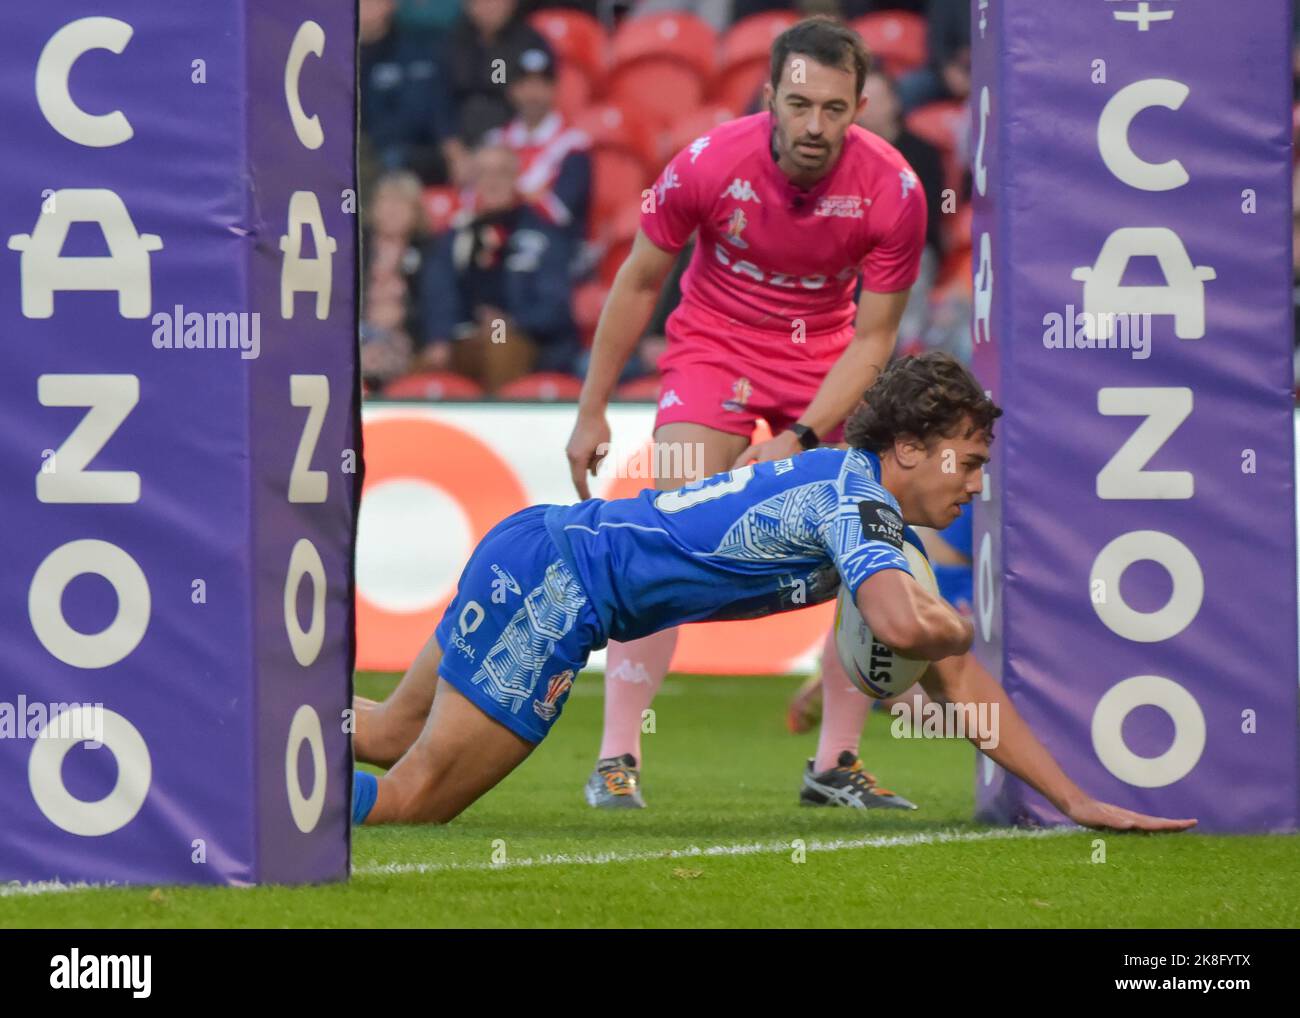 Doncaster, South Yorkshire, UK on October 23, 2022 Chanel Harris-Tavita of Samoa scores try   Rugby League World Cup 2021 group A match between Samoa V Greece at the Eco-Power Stadium, Doncaster, South Yorkshire, UK on October 23, 2022   (Photo by Craig Cresswell/Alamy Live News) Stock Photo